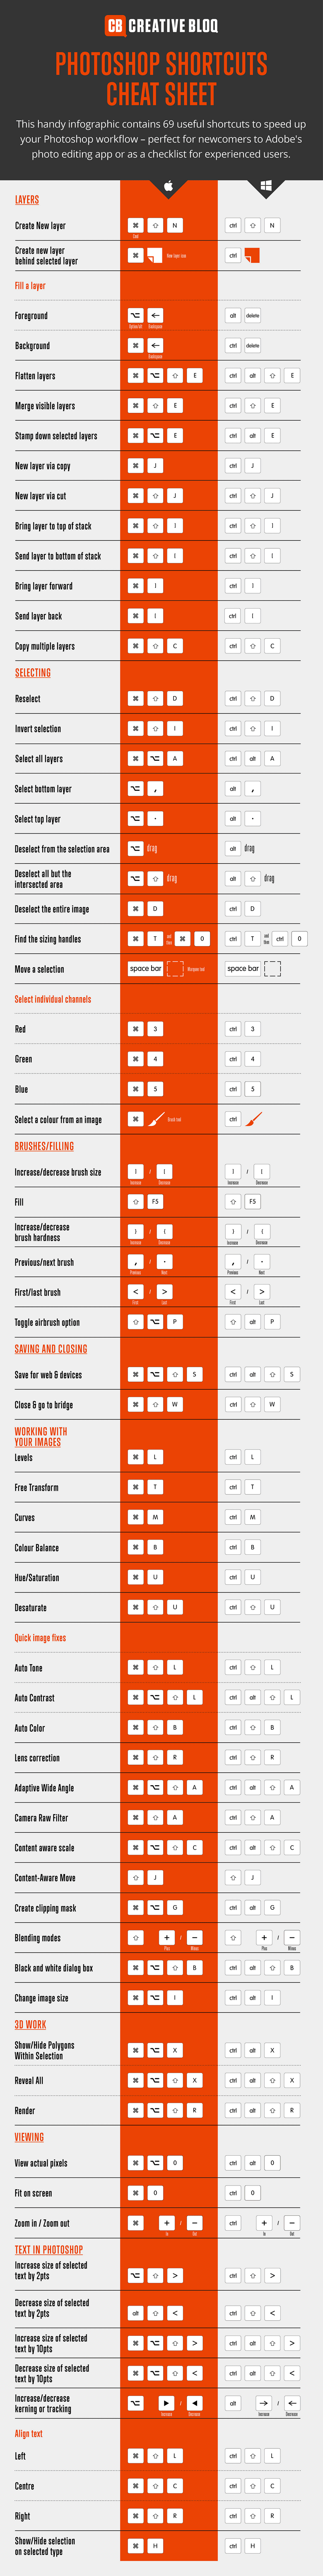 A Handy Cheat Sheet Of 69 Photoshop Shortcuts For Mac And Windows Users